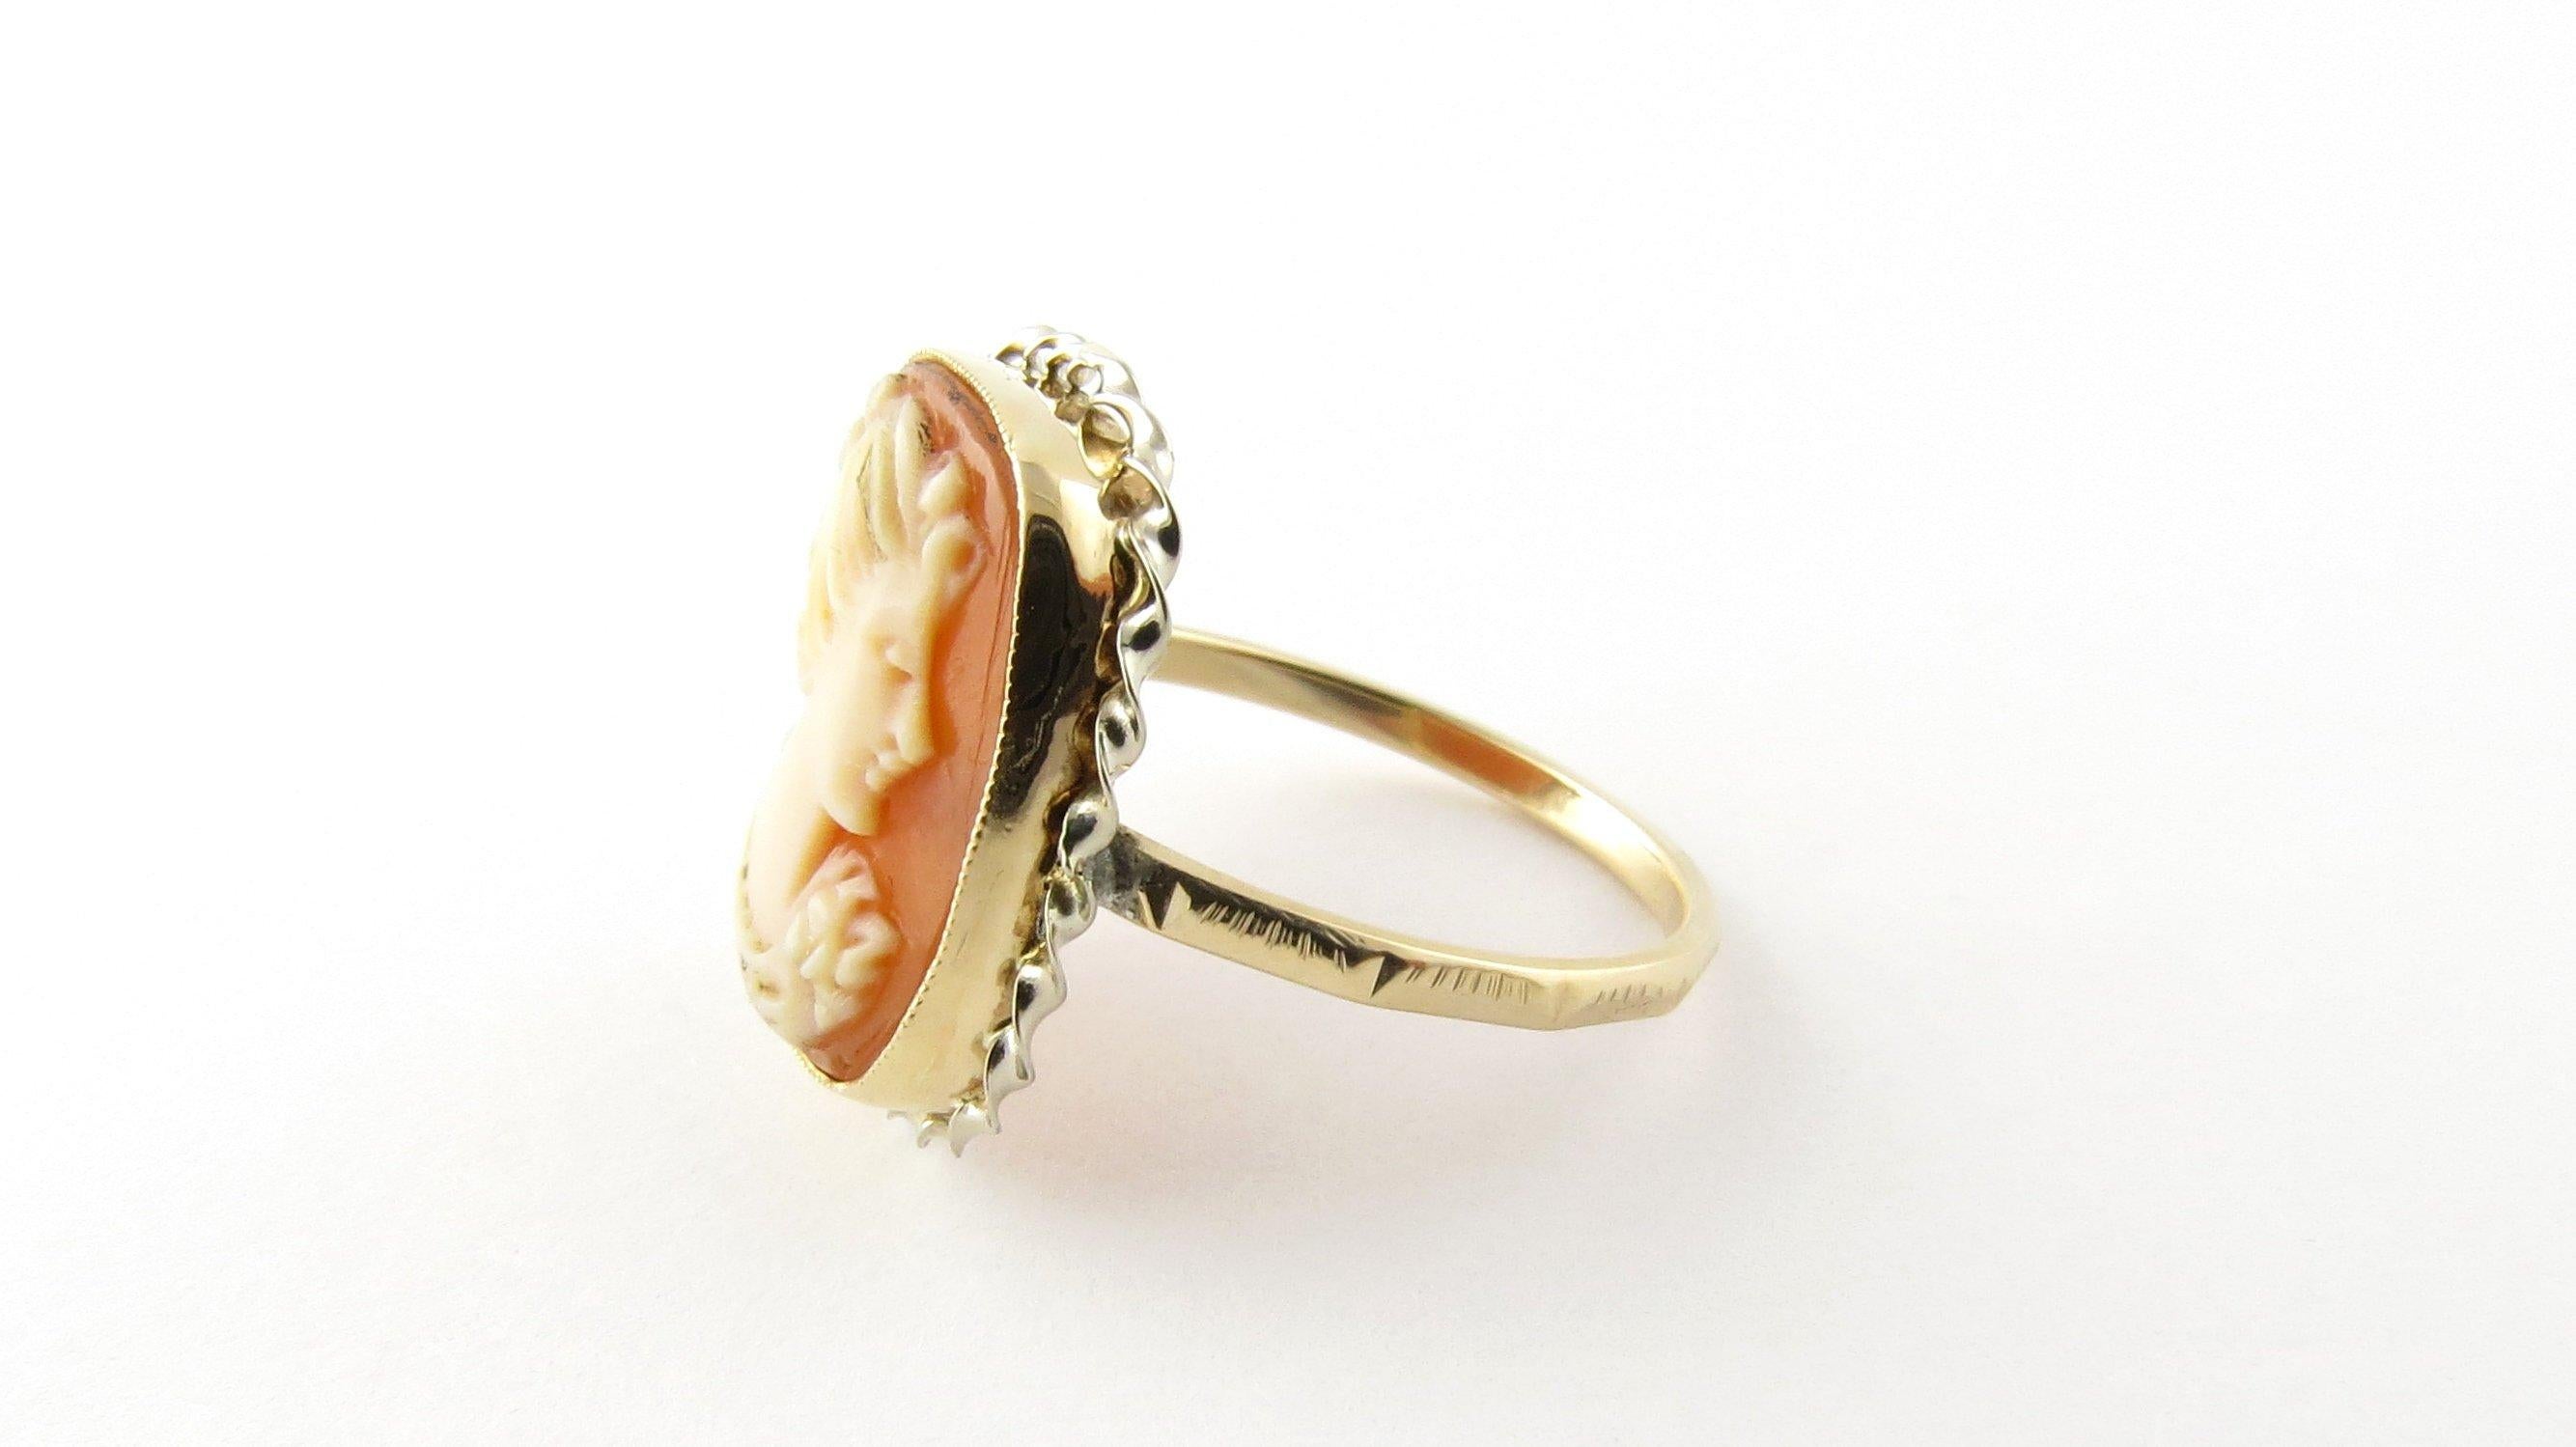 Vintage 10 Karat Yellow Gold Cameo Ring Size 5.25. This lovely cameo ring features a lovely lady in profile set in beautifully detailed 10K yellow gold. Cameo measures 16 mm x 13 mm. Shank measures 1 mm.
Ring Size: 5.25 Weight: 1.4 dwt. / 2.3 gr.